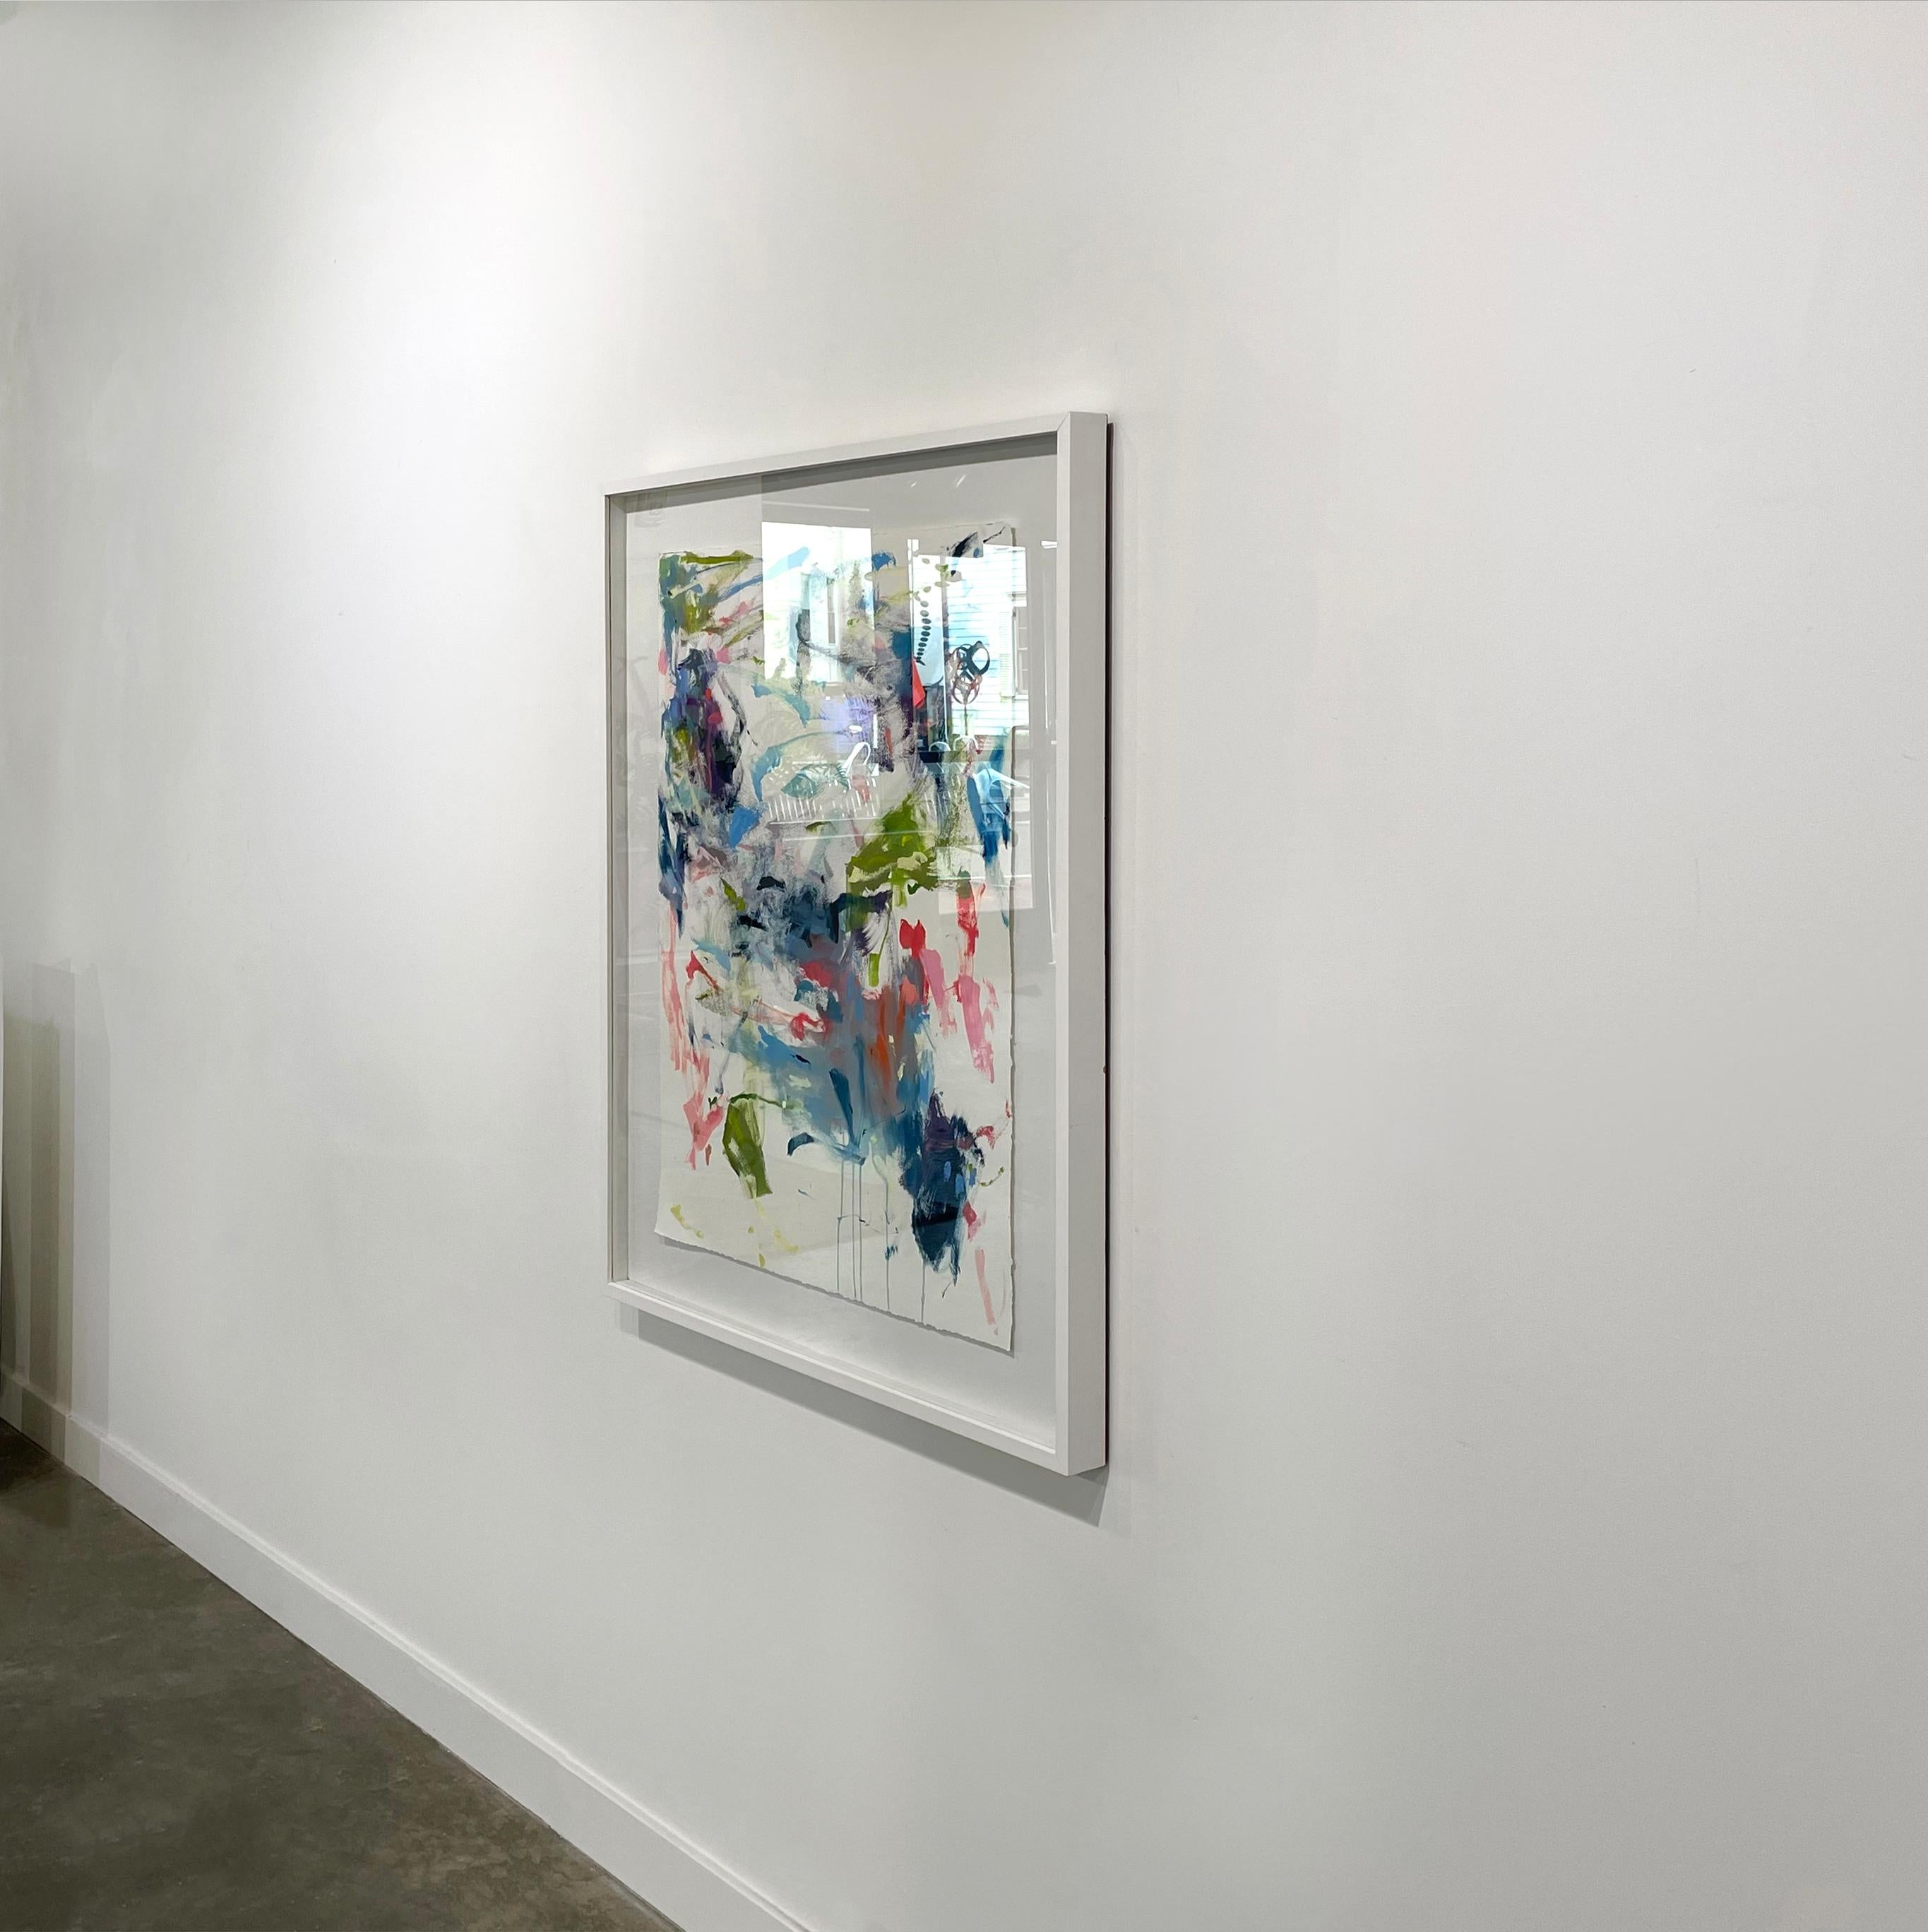 This contemporary abstract painting by Kelly Rossetti is made with oil paint on paper. Energetic strokes of blue, red, and green come together on a white background to create a lively, expressive piece. The painting itself is 22